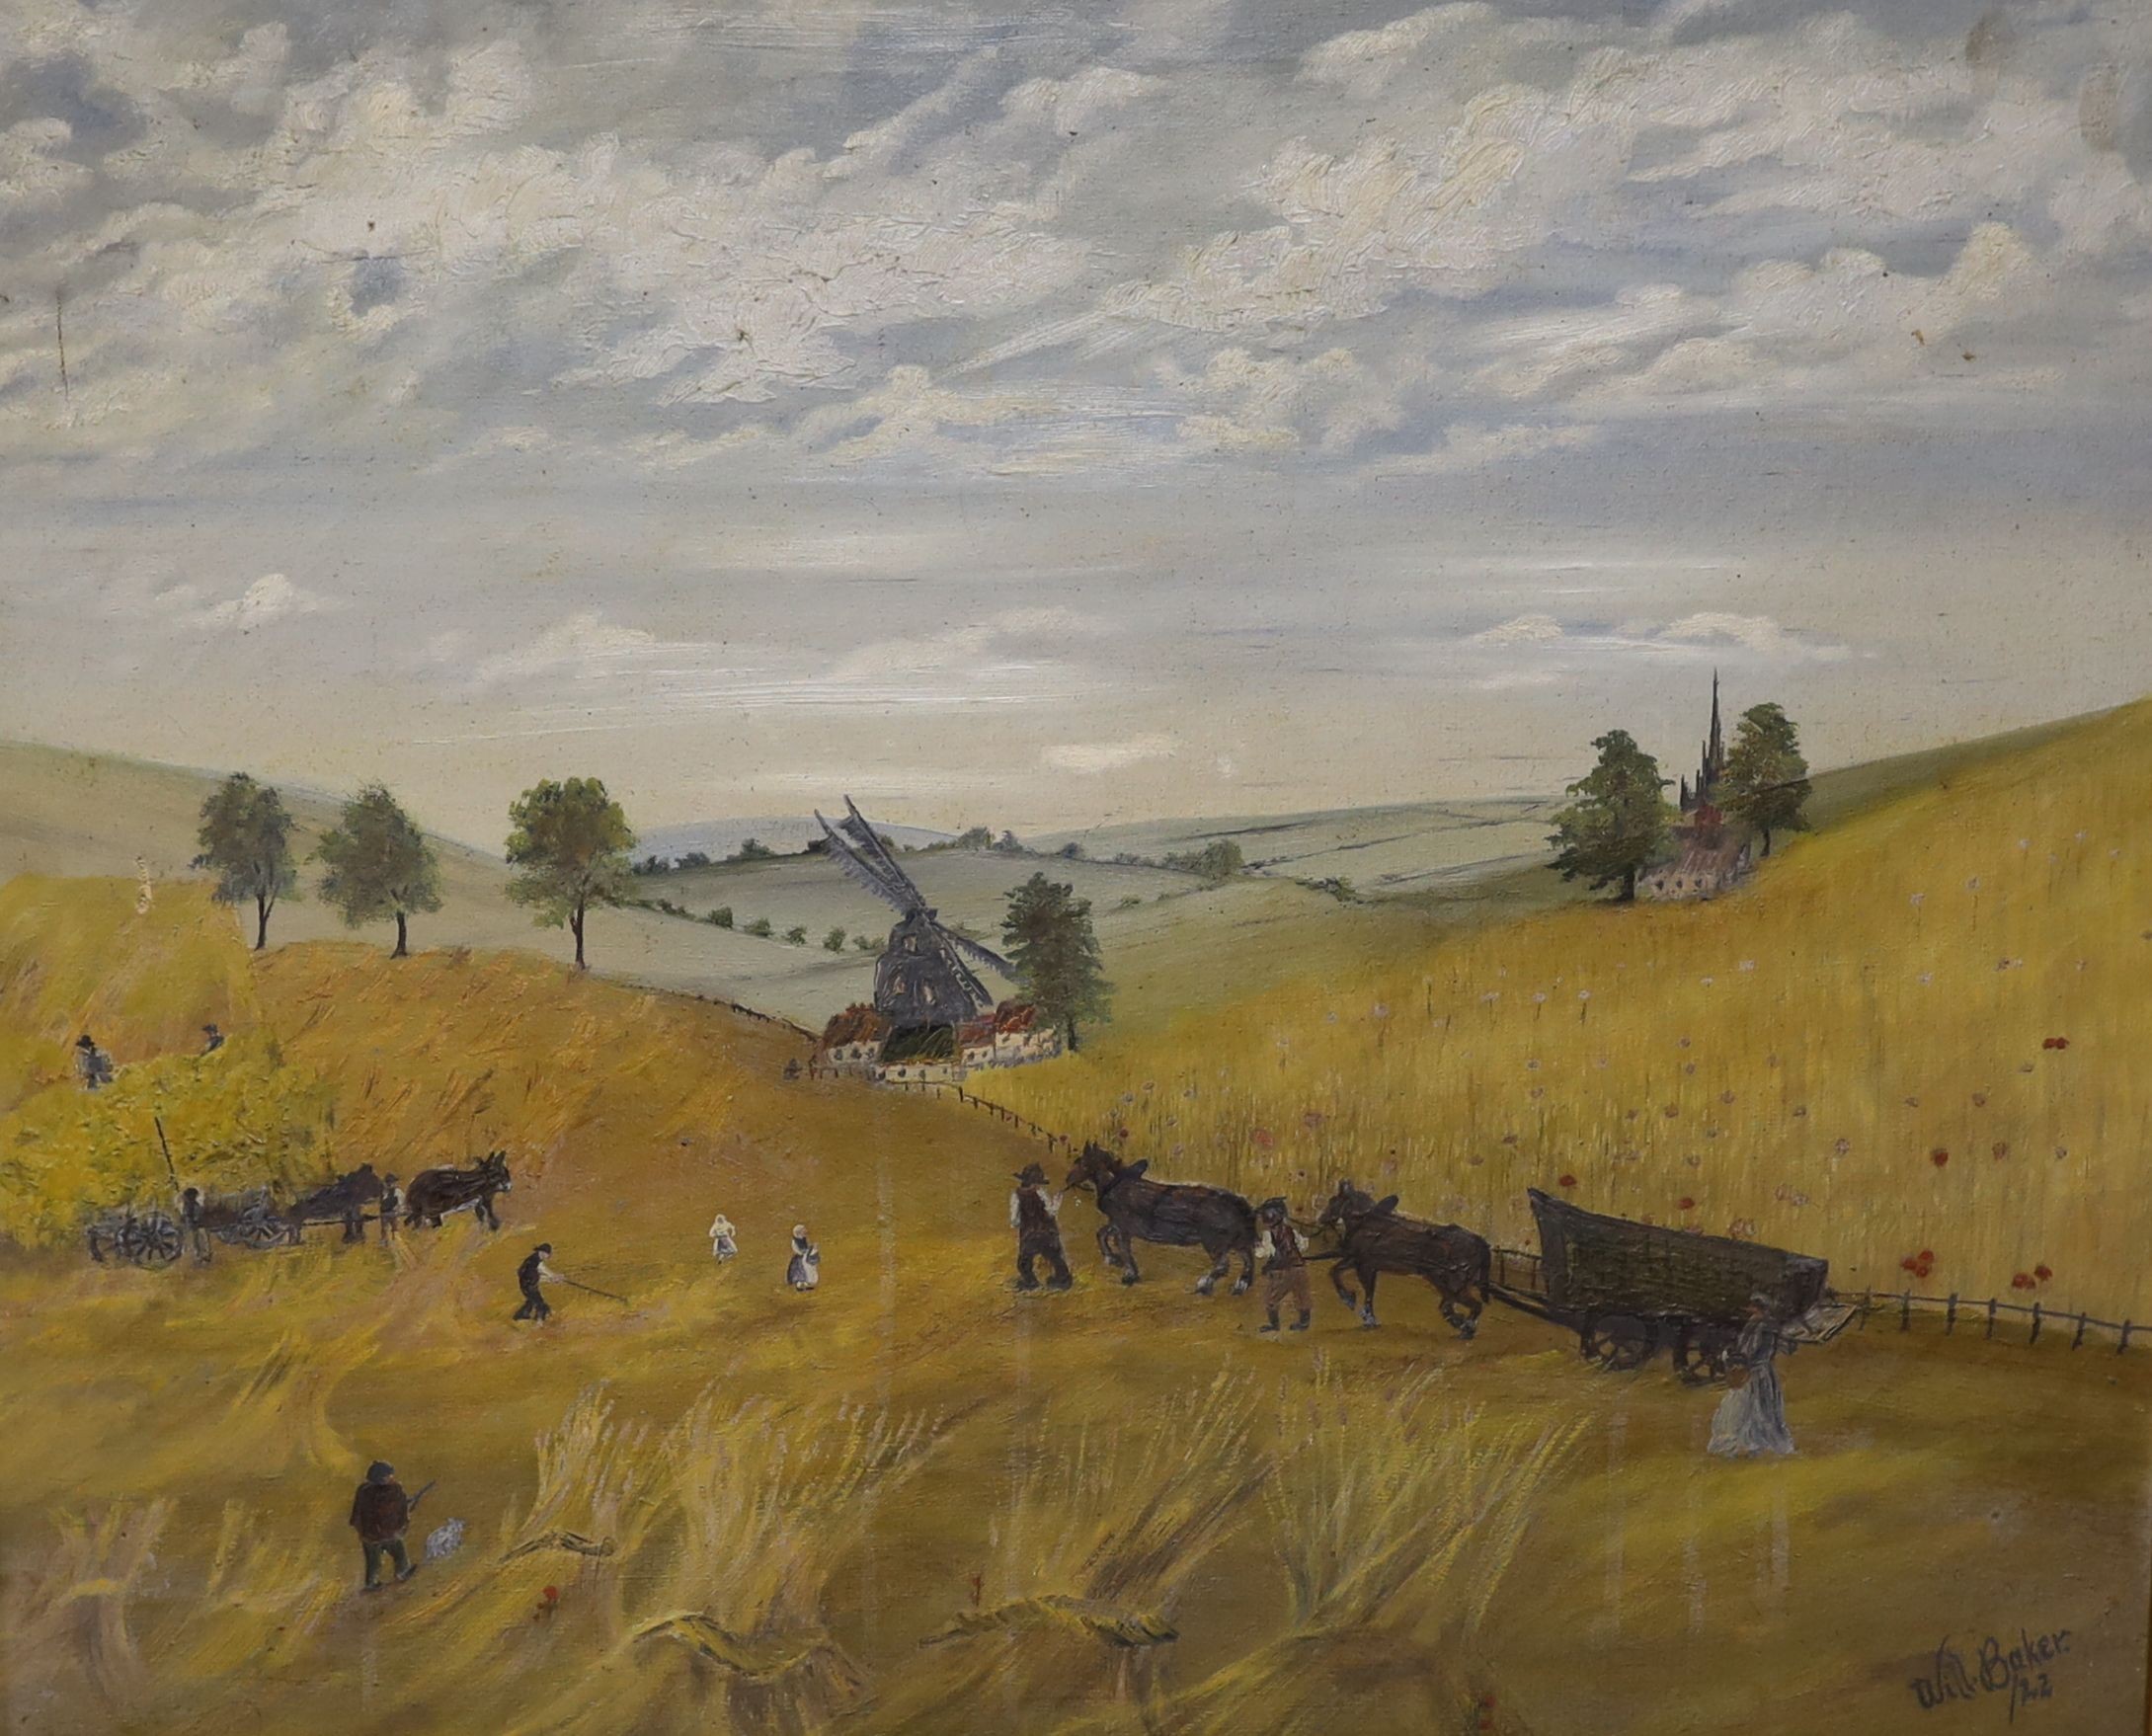 William Baker (American), oil on canvas, “Amish farming settlement’, signed and dated ’22, 50 x 60cm. *This lot is being sold in aid of the charity Dogs Trust UK with 100% of the hammer price going to the charity